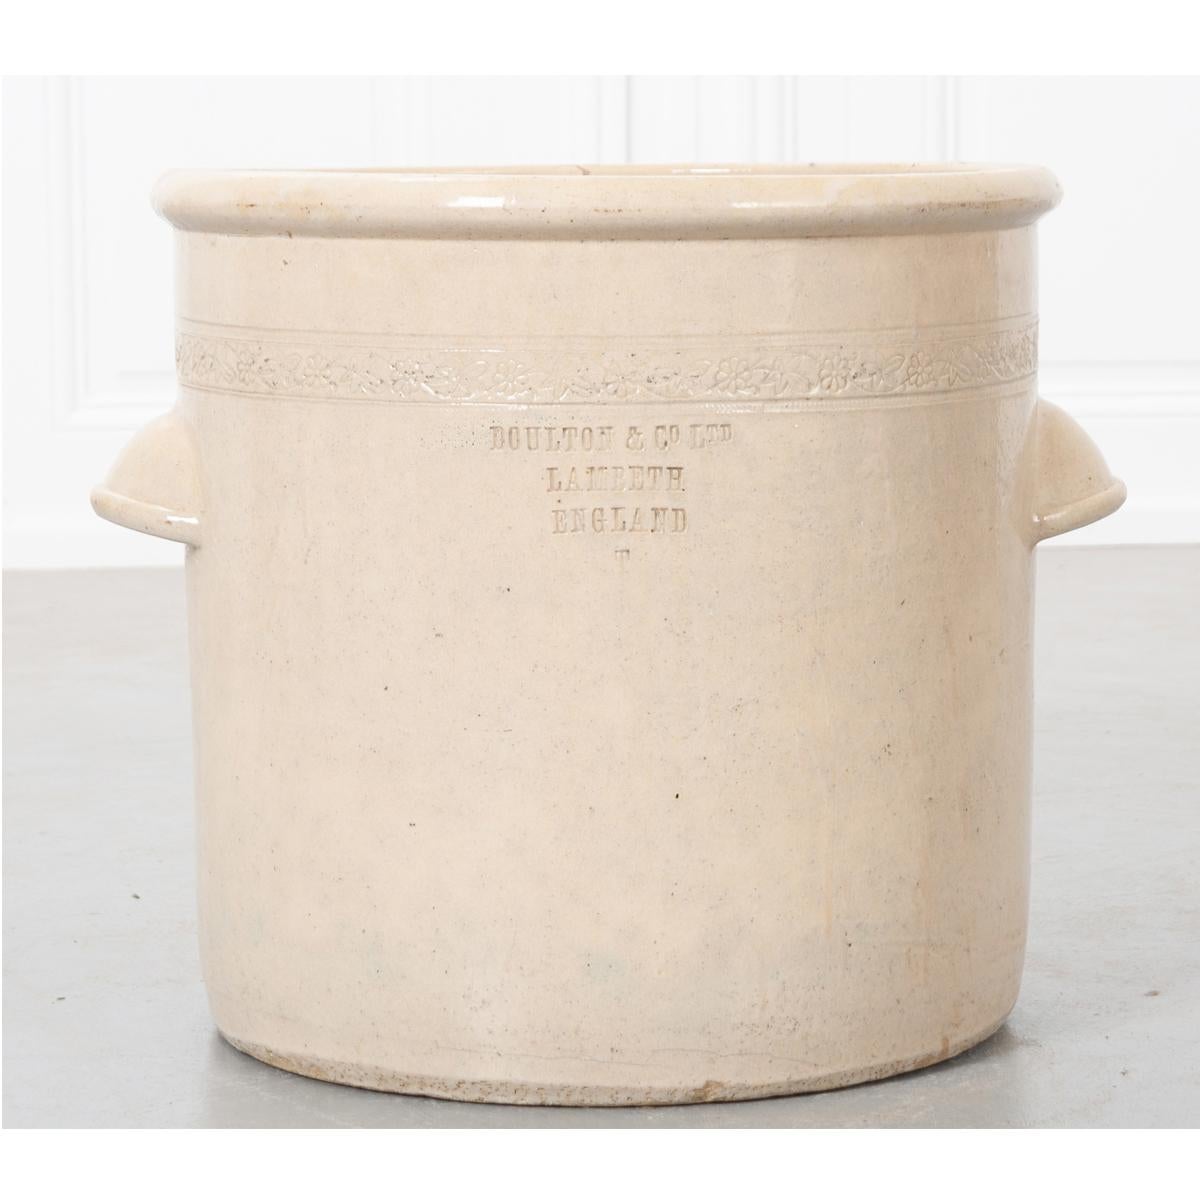 A late 19th century, Doulton & Company, cream color glazed stoneware jar of large proportions. You will find stamped on the side of the jar “Doulton & Co. Ltd. Lambeth, England T’. There is also a decorative floral banding and two handles fashioned